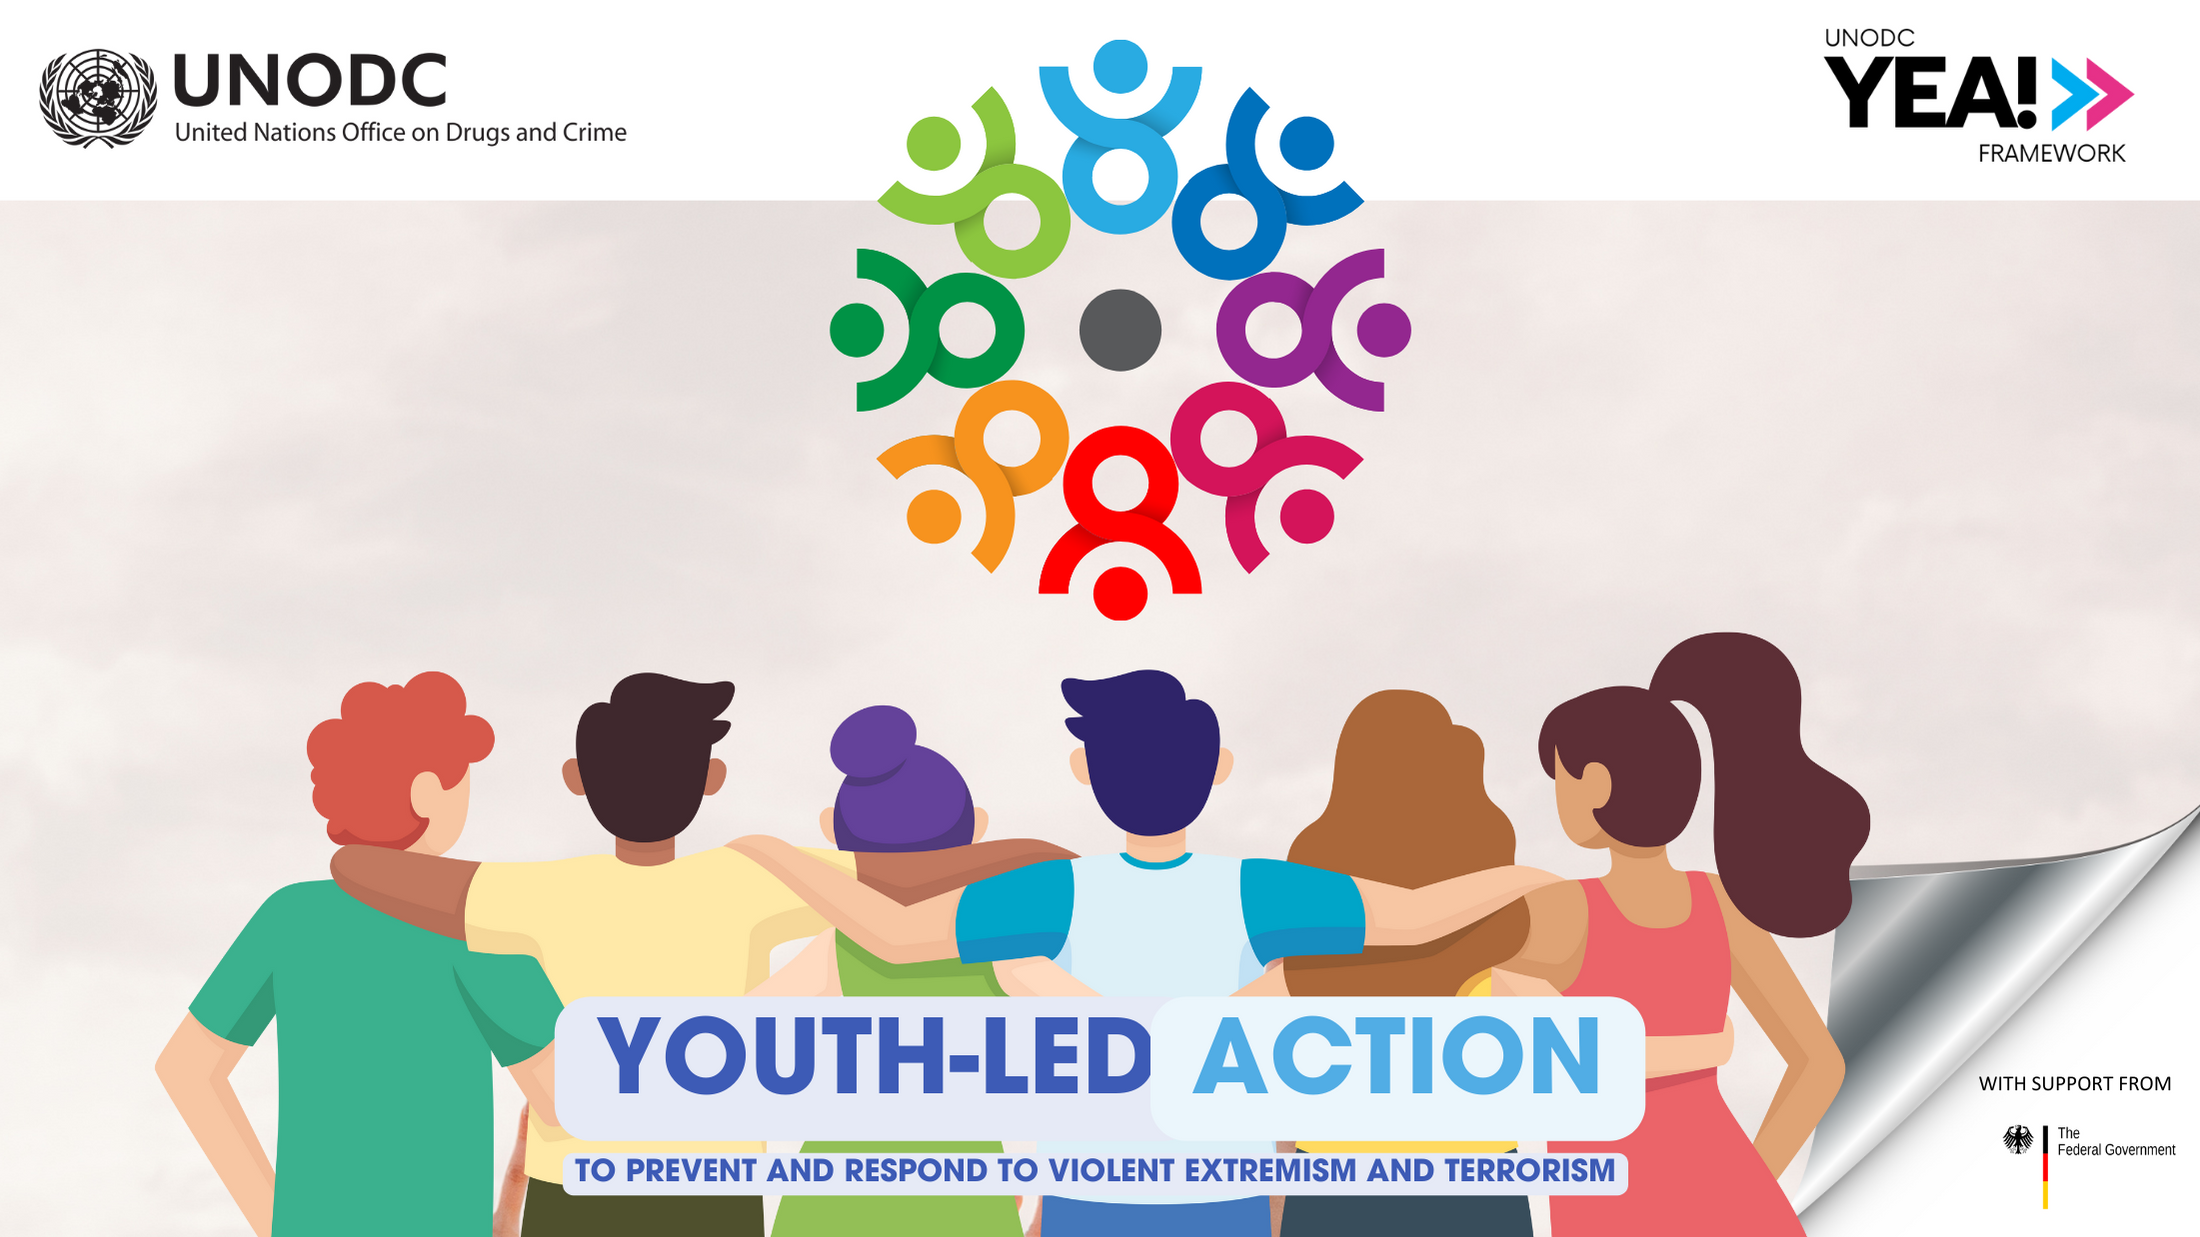 Illustration of a diverse group of young people. Text: "YOUTH-LED ACTION to prevent and respond to violent extremism and terrorism." Included logos are UNODC, UNODC YEA! FRAMEWORK, and  